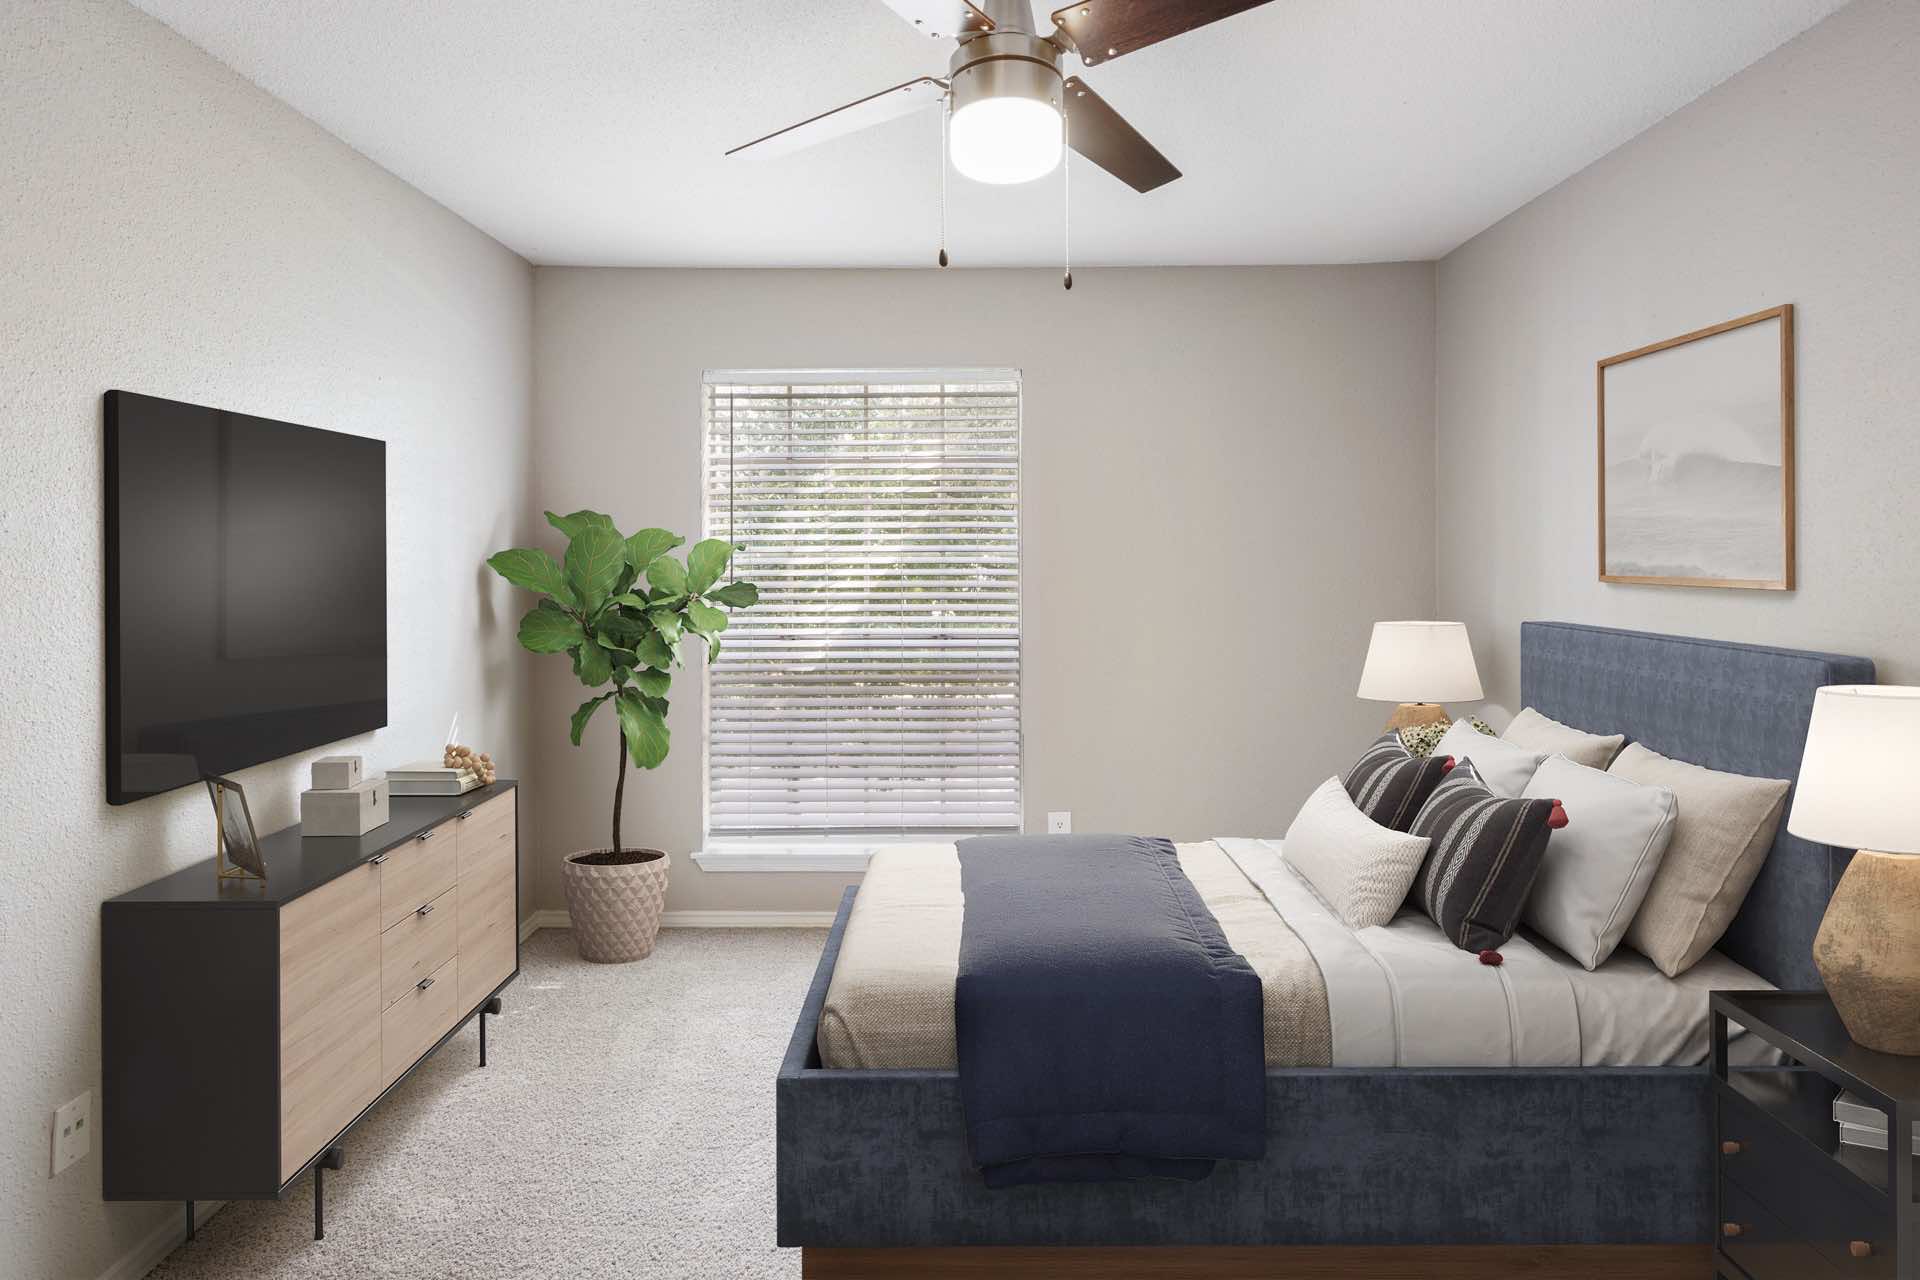 ceiling fan, wall-mounted tv, and large window in bedroom